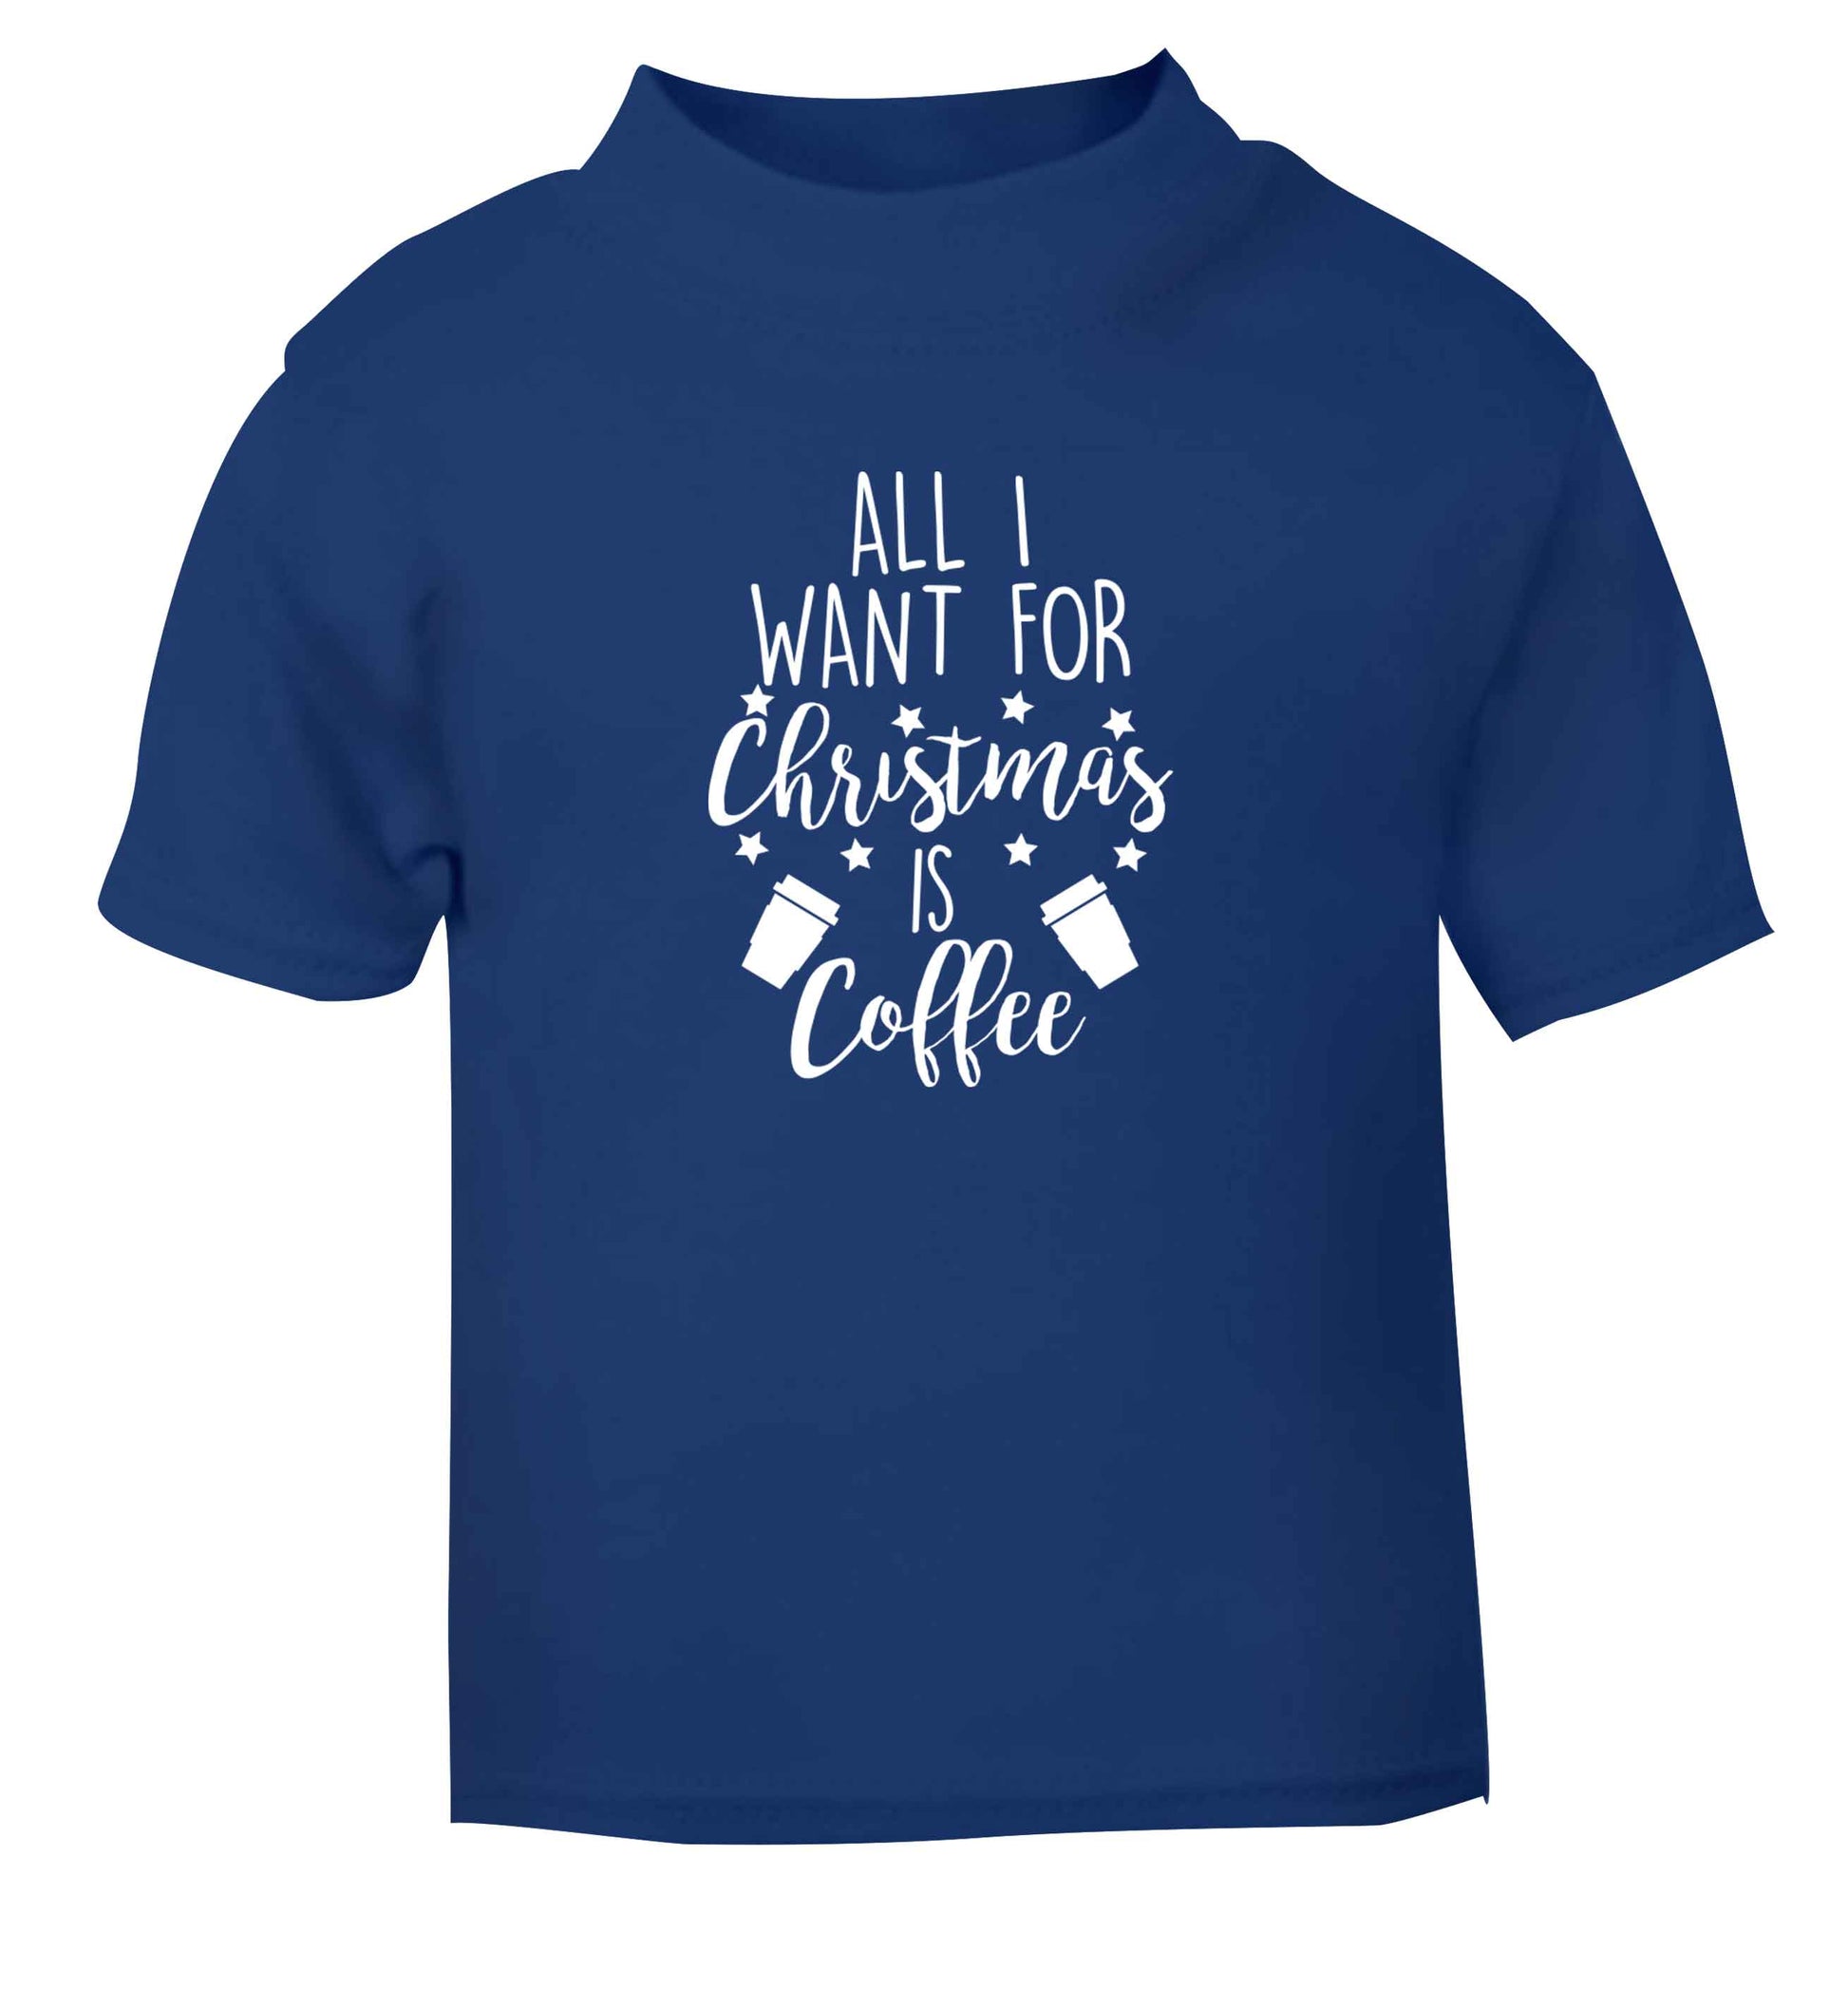 All I want for Christmas is coffee blue Baby Toddler Tshirt 2 Years